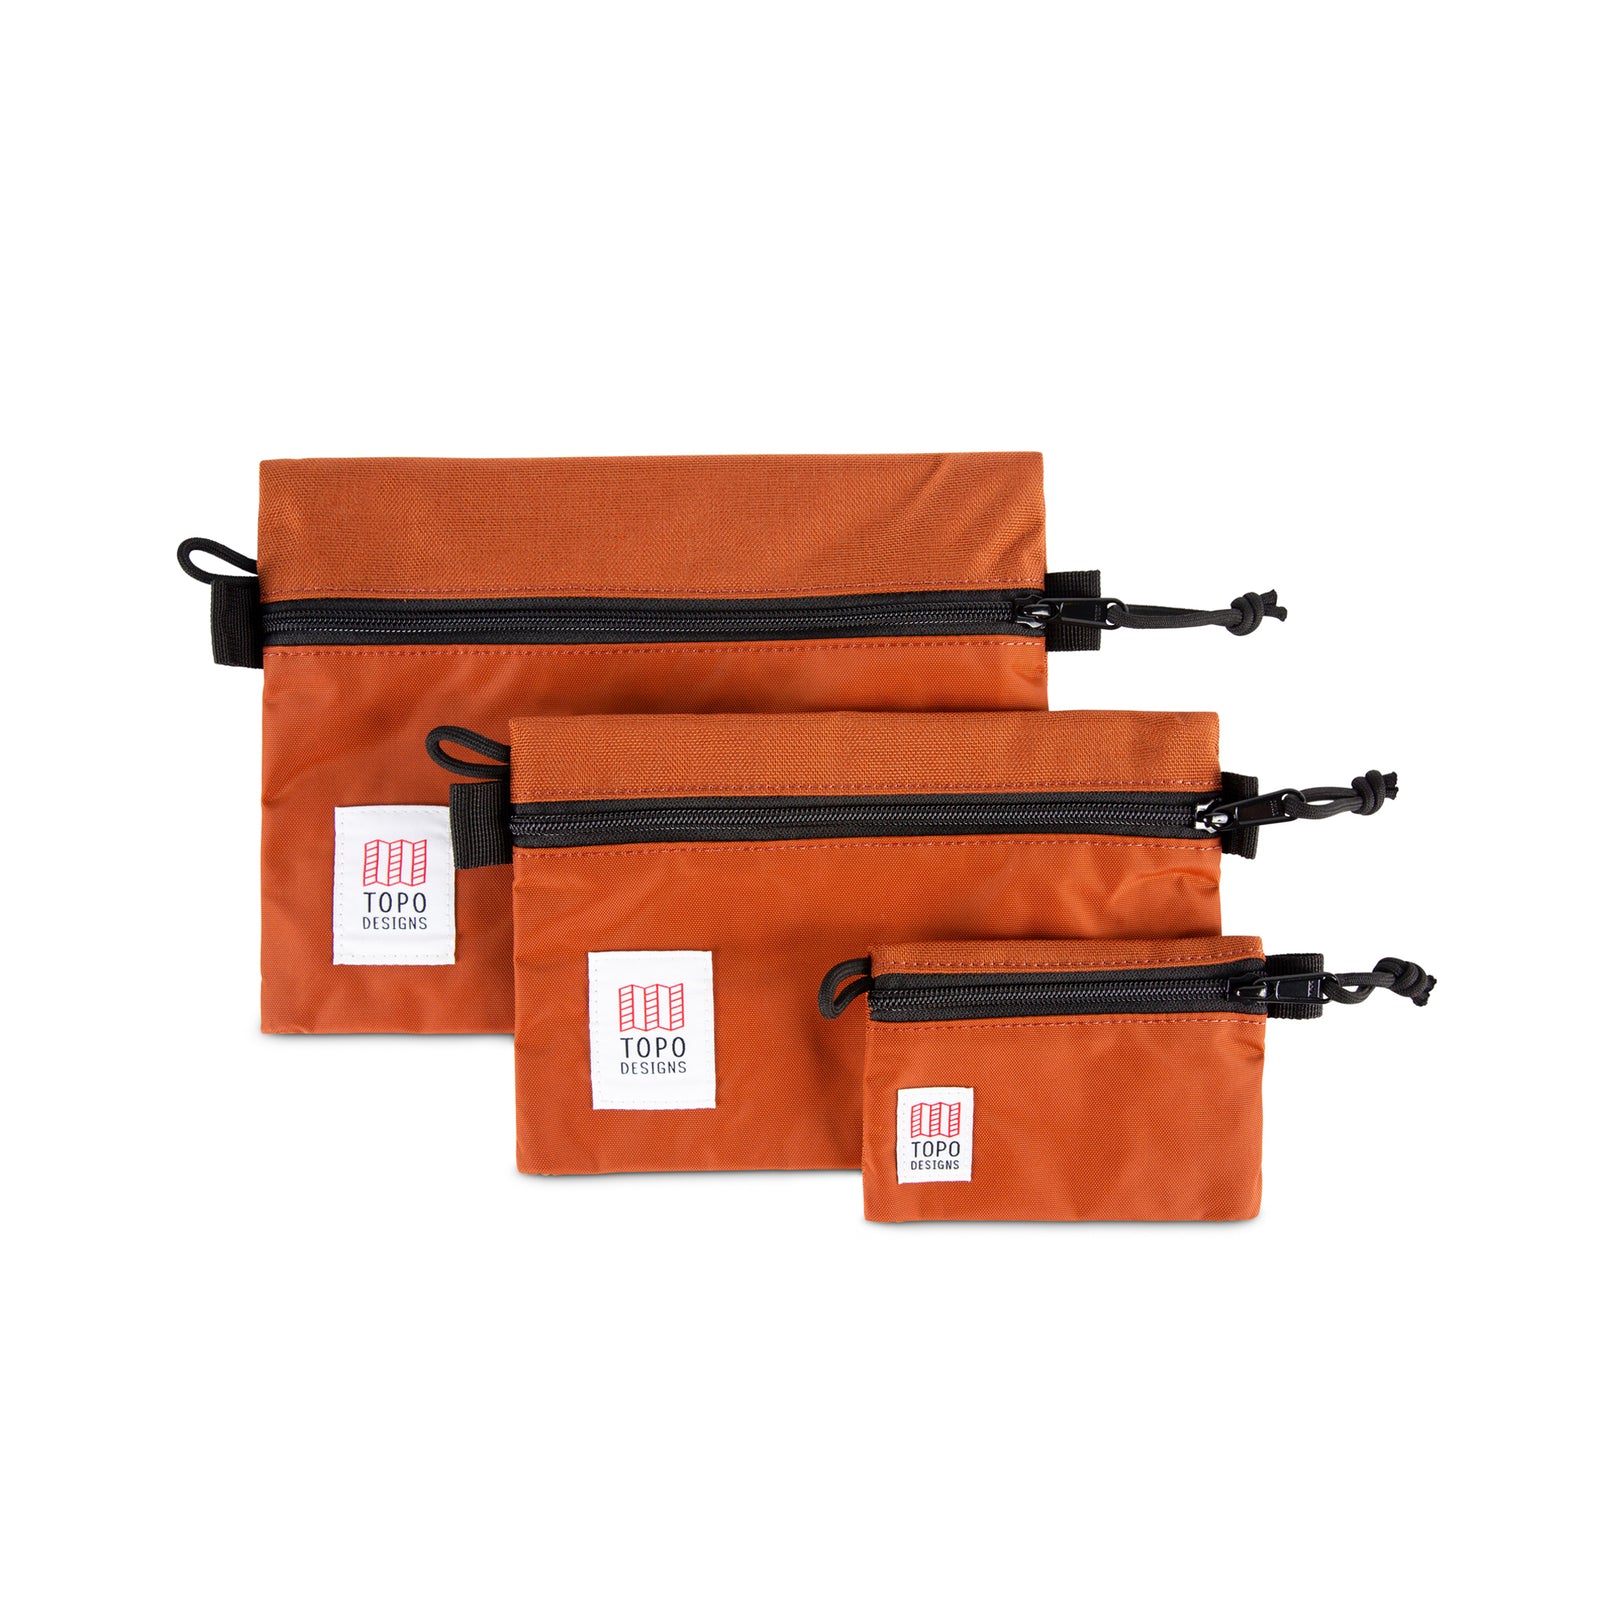 Topo Designs Accessory Bags - product shot of the "Medium", "Small", and "Micro" accessory bags in "Clay - Recycled" orange.